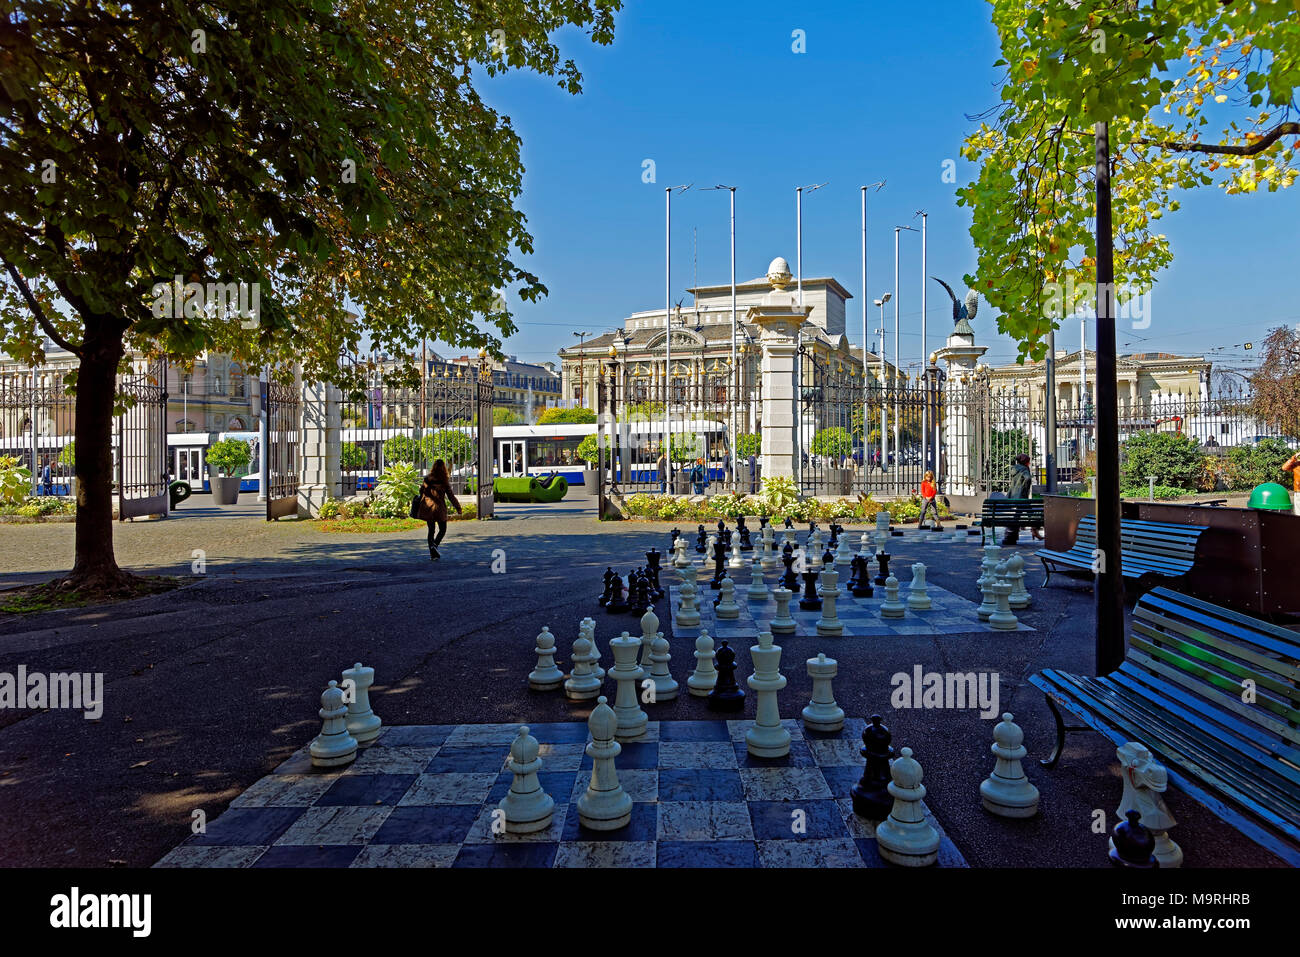 Europe, Switzerland, Genève, Geneva, Geneva, promenade of the Bastions, to chess, figures, Parc of the Bastions, trees, place of interest, tourism, tr Stock Photo